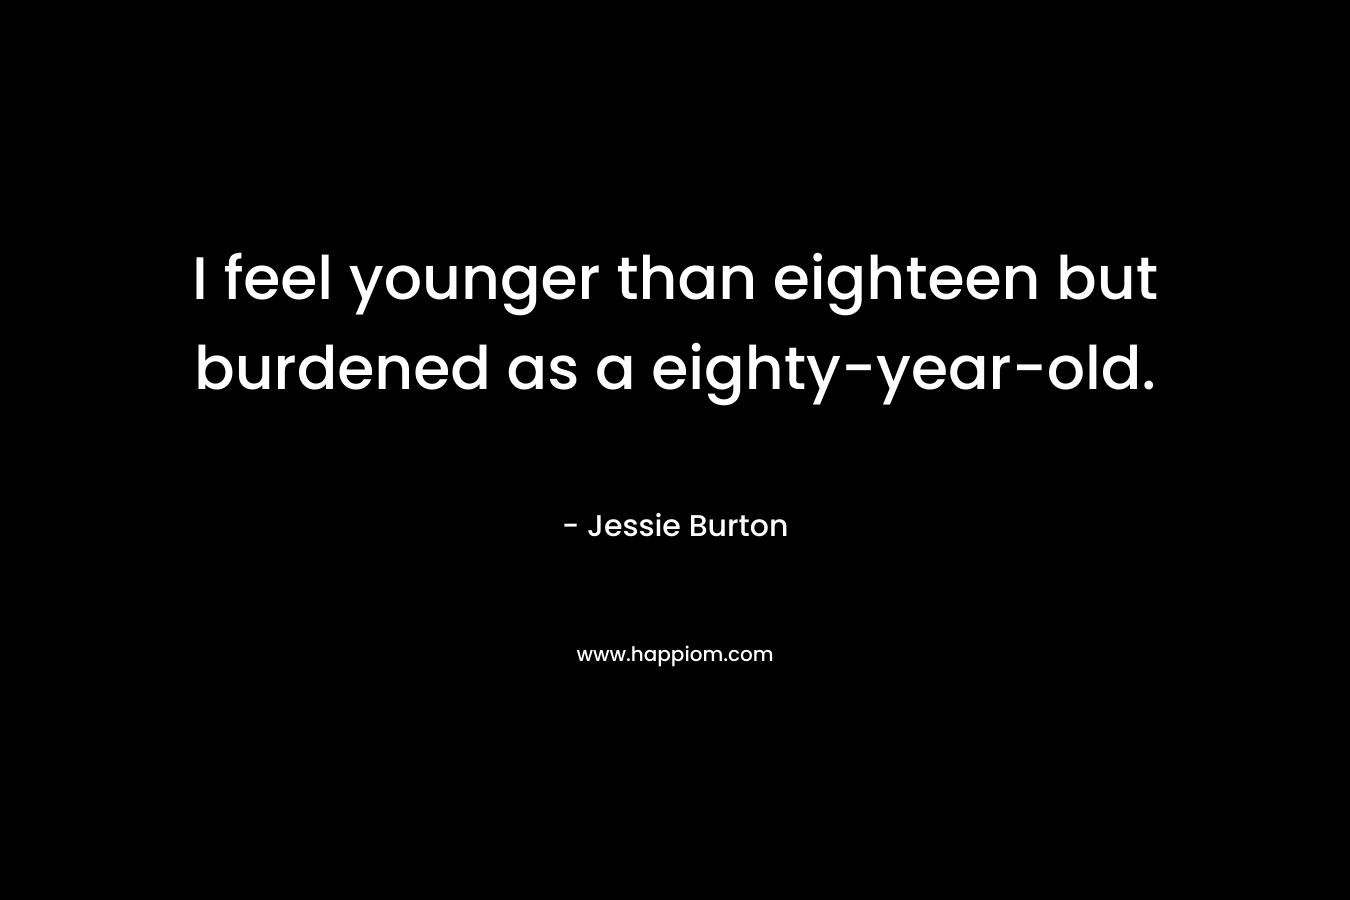 I feel younger than eighteen but burdened as a eighty-year-old. – Jessie Burton